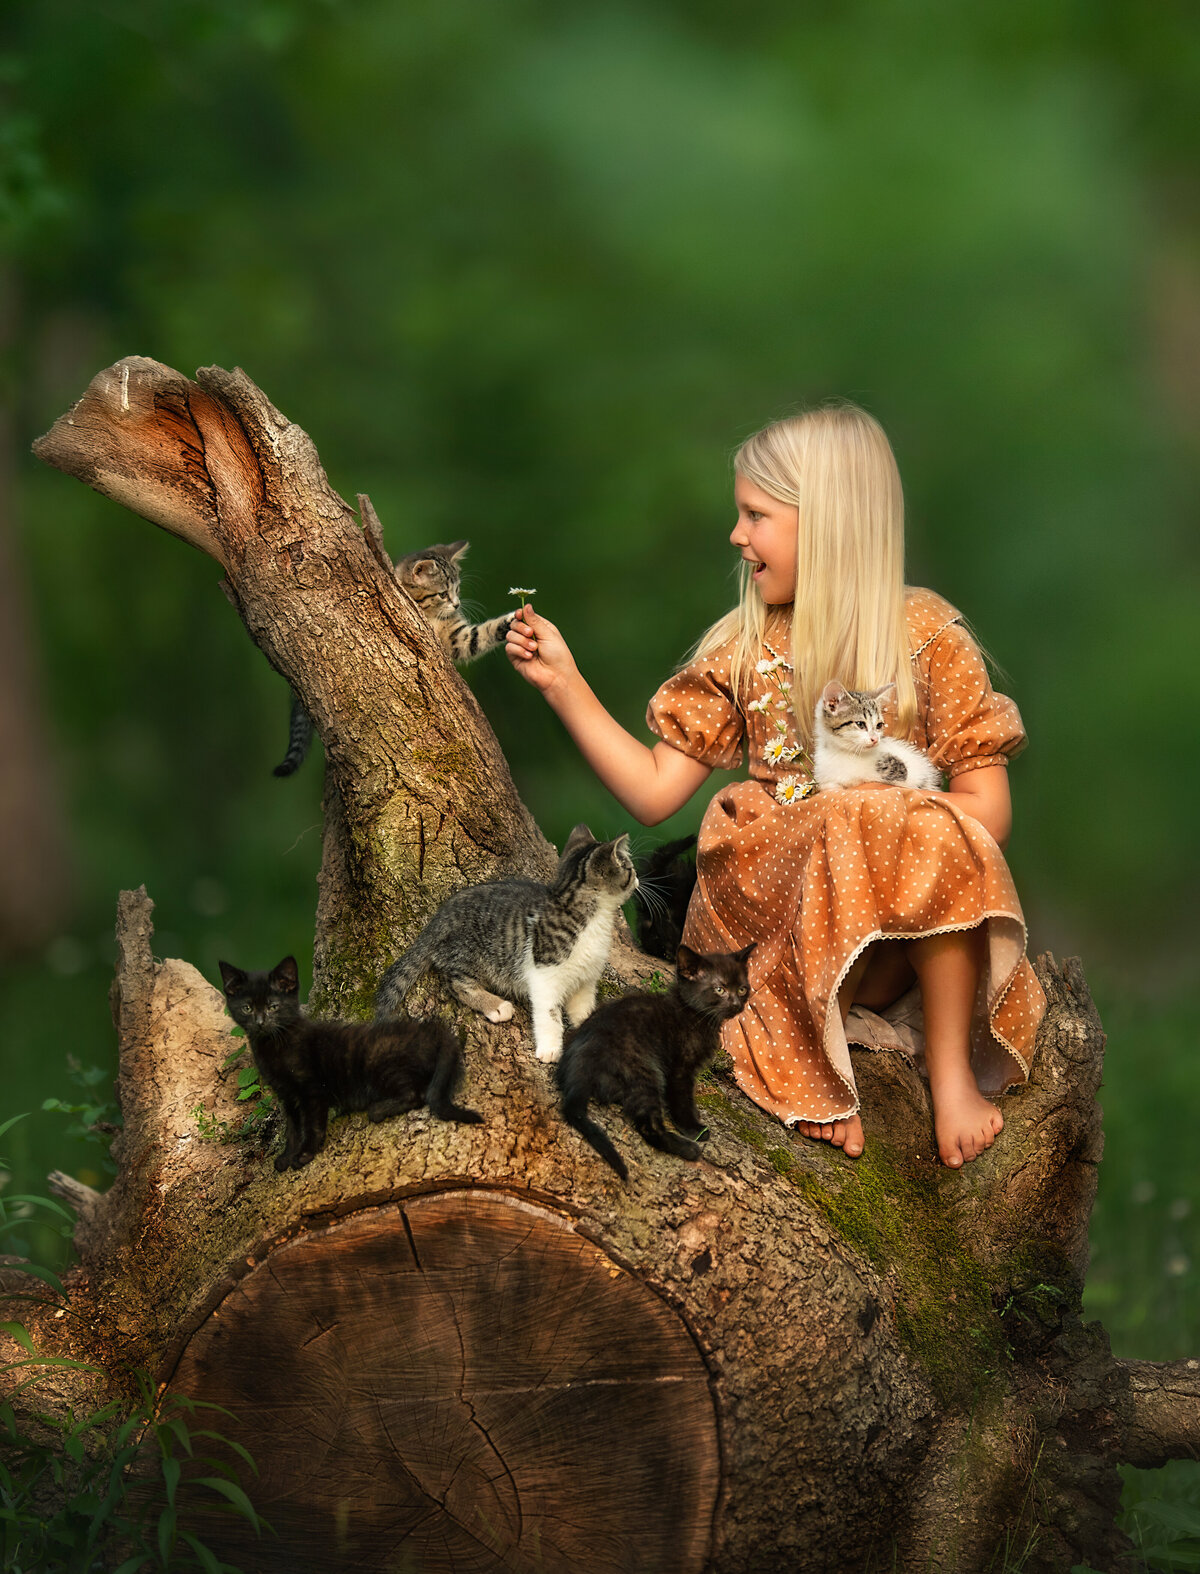 blonde girl in vintage style dress sitting on a tree stump and playing with cats.